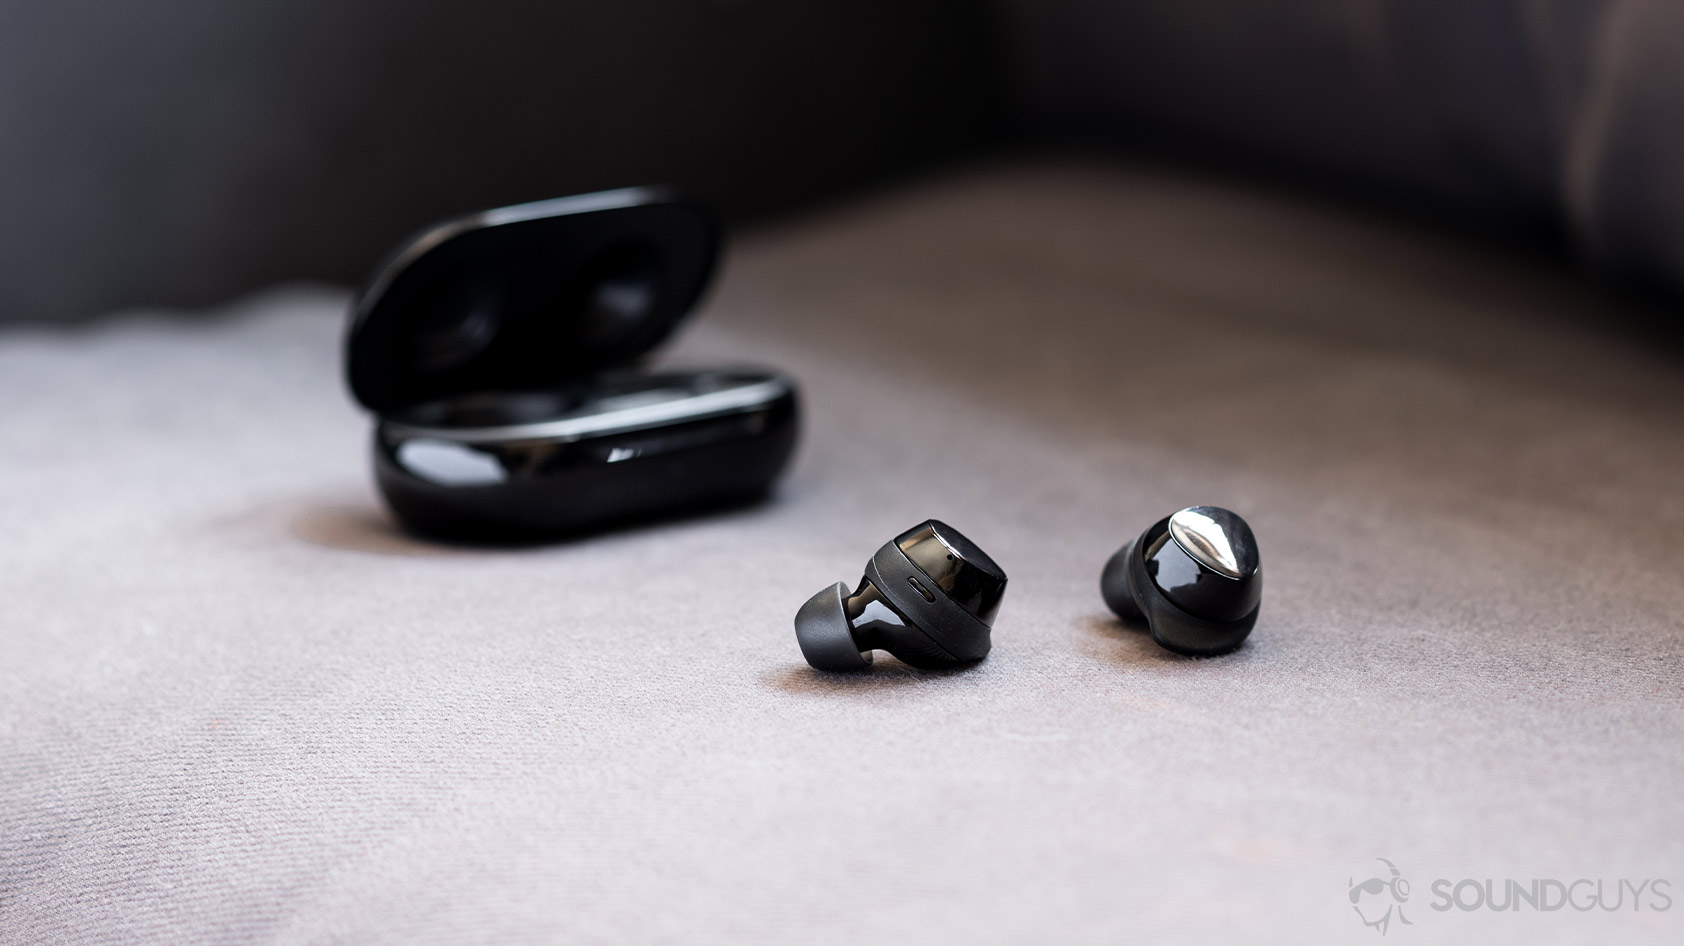 A picture of the Samsung Galaxy Buds Plus earbuds out and in front of the case, which is open in the background.